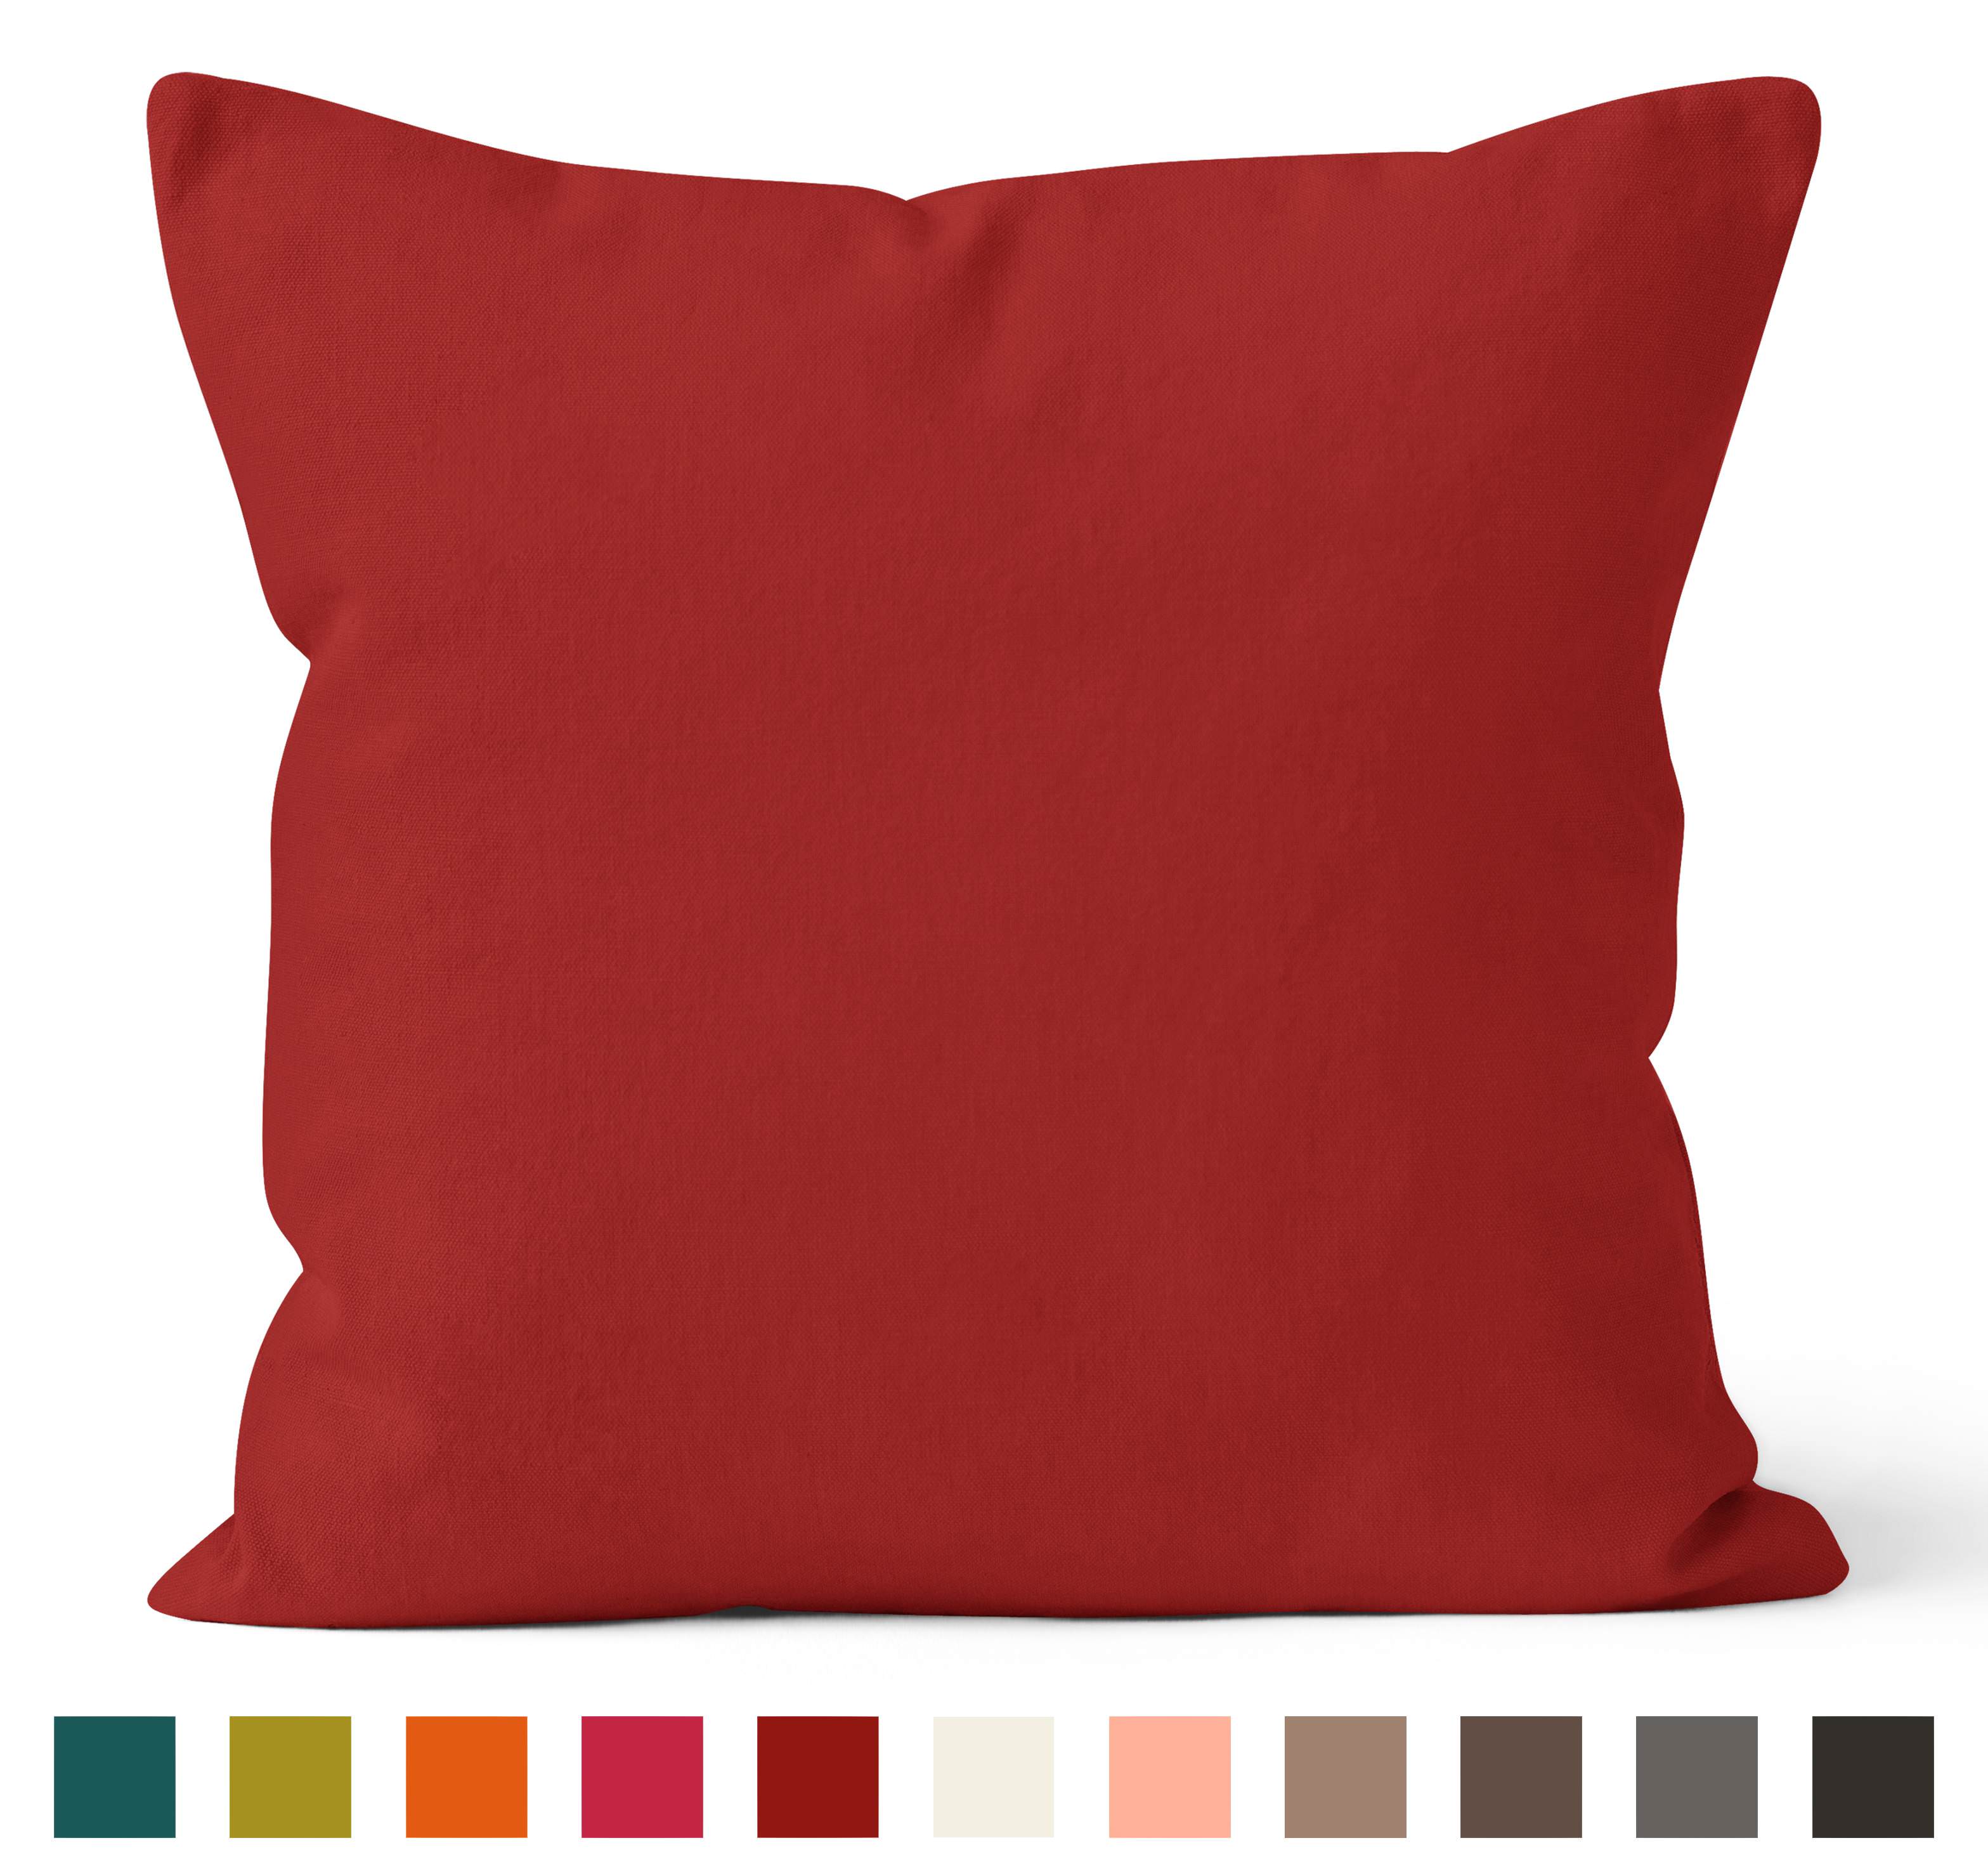 Encasa Homes Dyed Cotton Canvas Filled Cushion - 40x40 cm, Deep Red